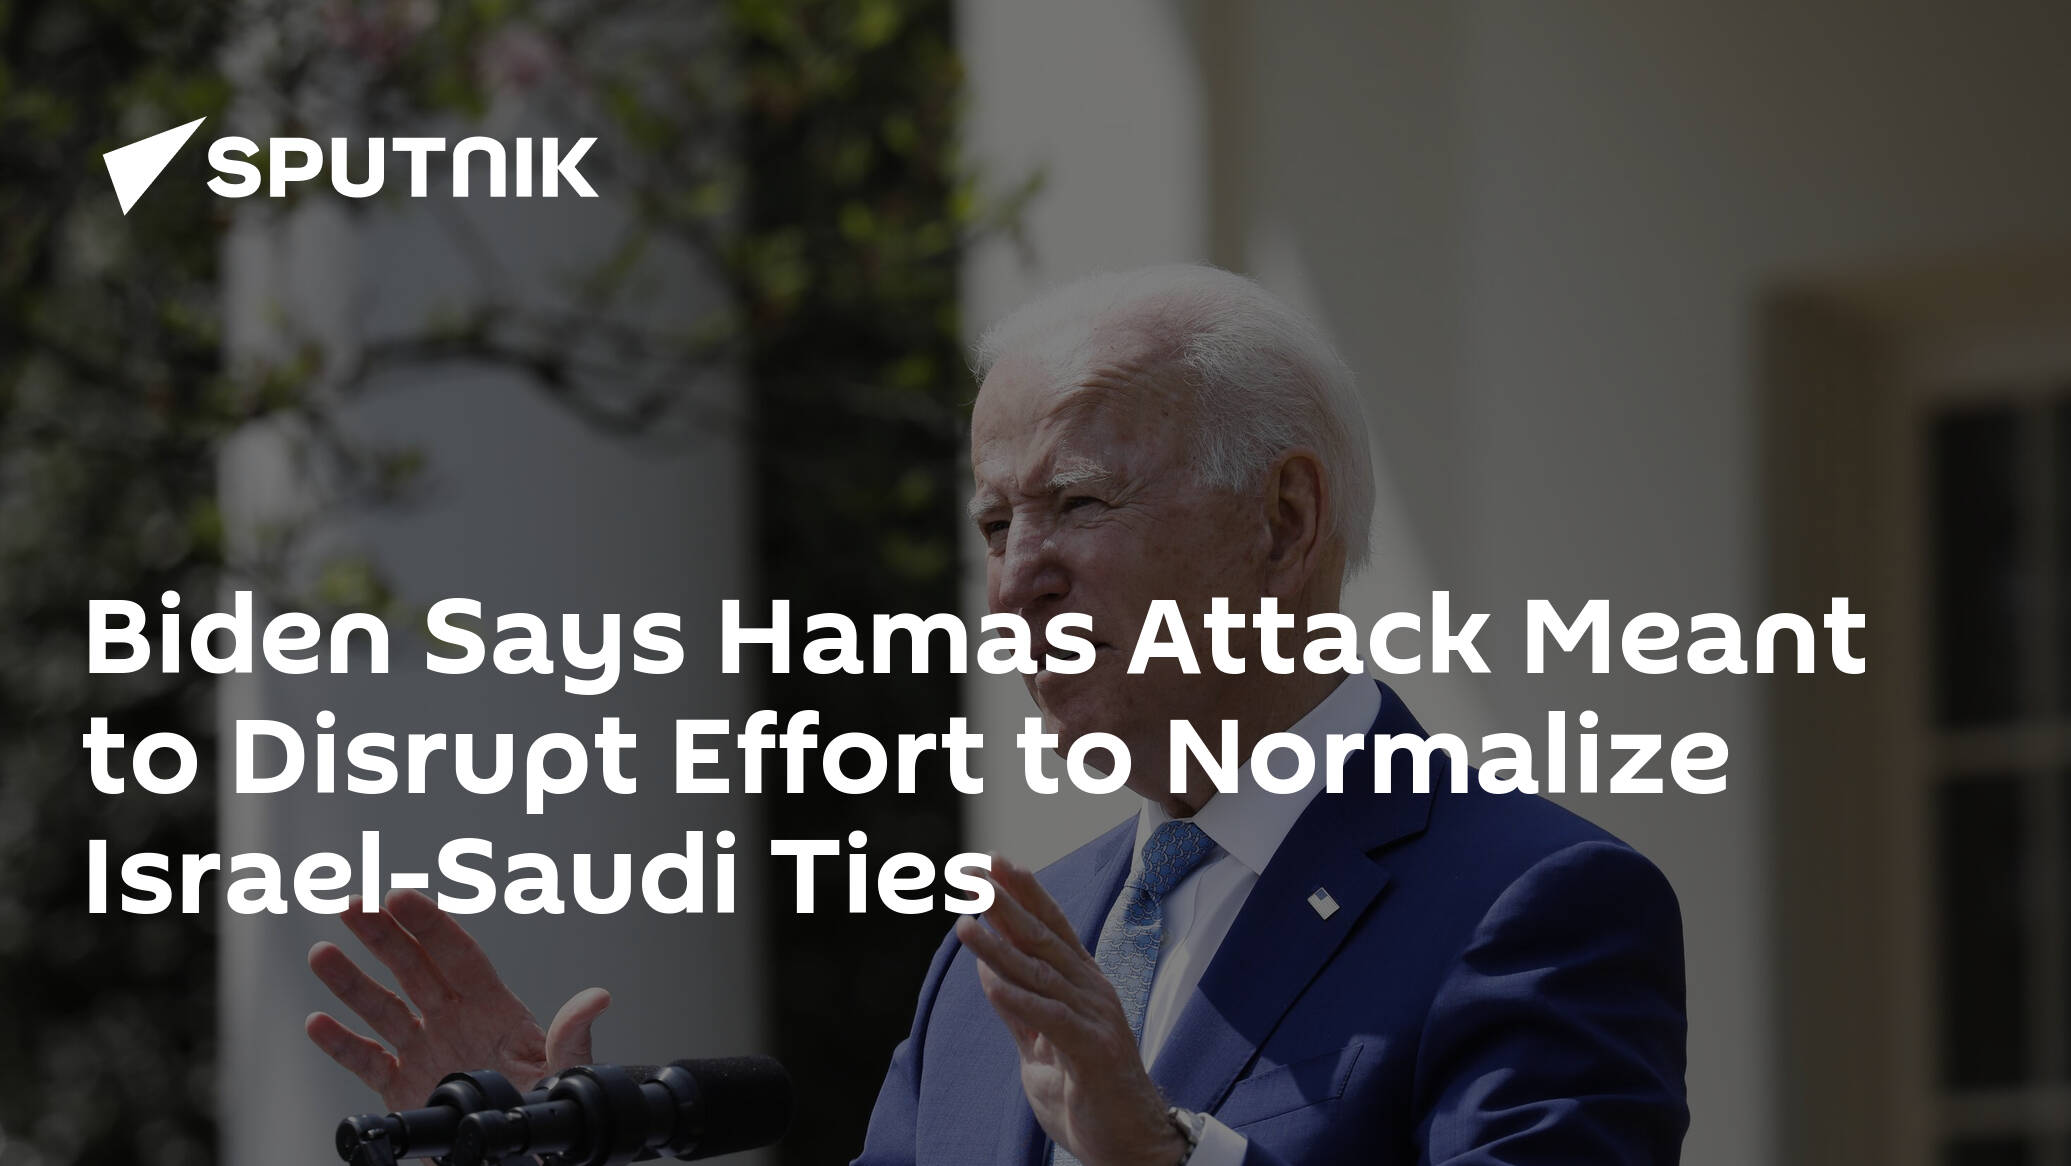 Biden Says Hamas Attack Meant to Disrupt Effort to Normalize Israel-Saudi Ties